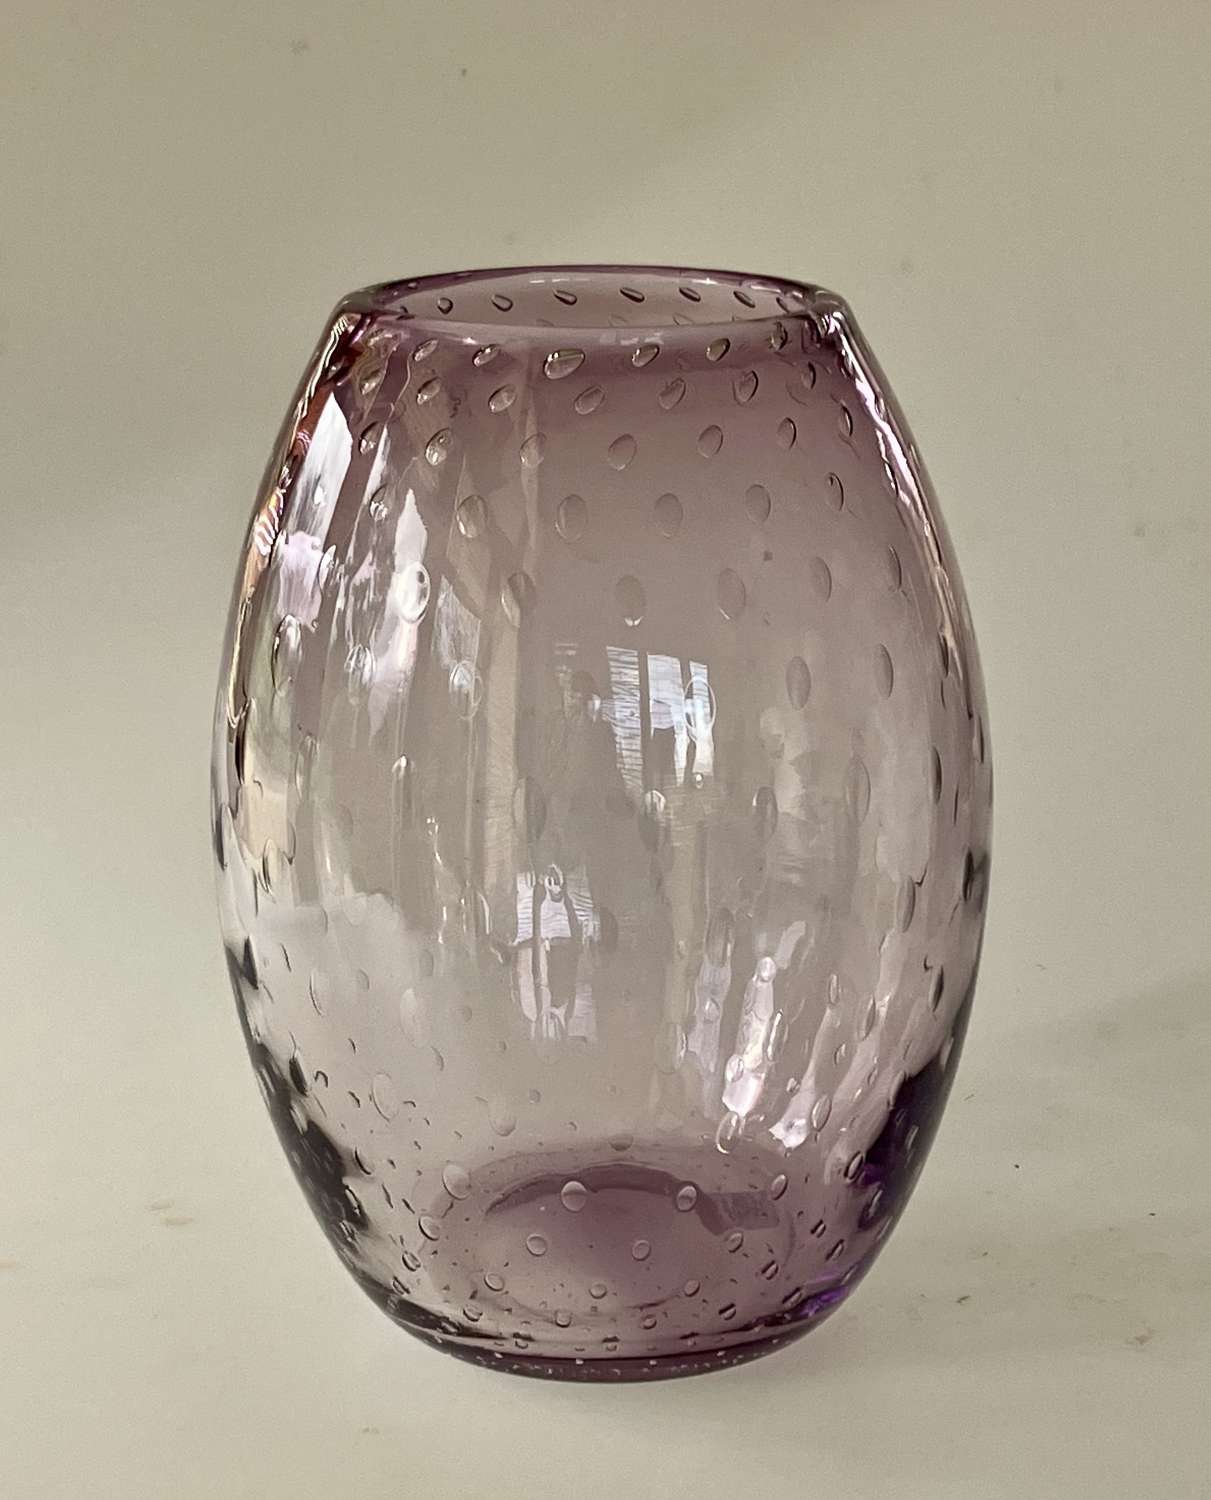 Amethyst bubble vase by Keith Murray